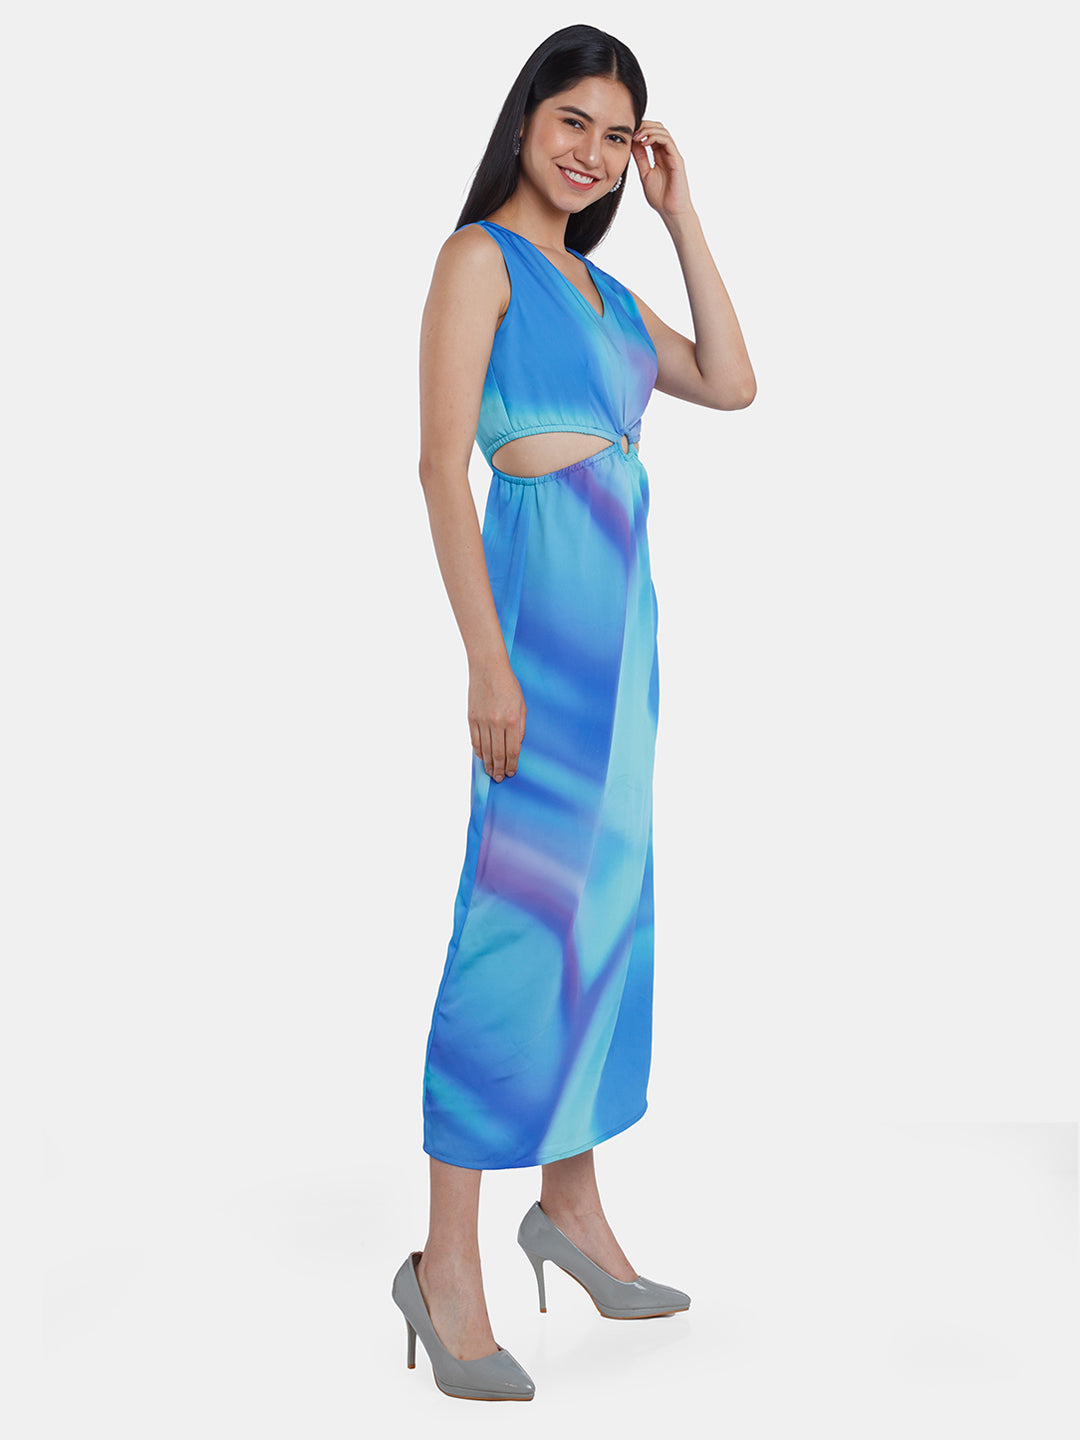 Multicolored Printed Cut Out Maxi Dress For Women